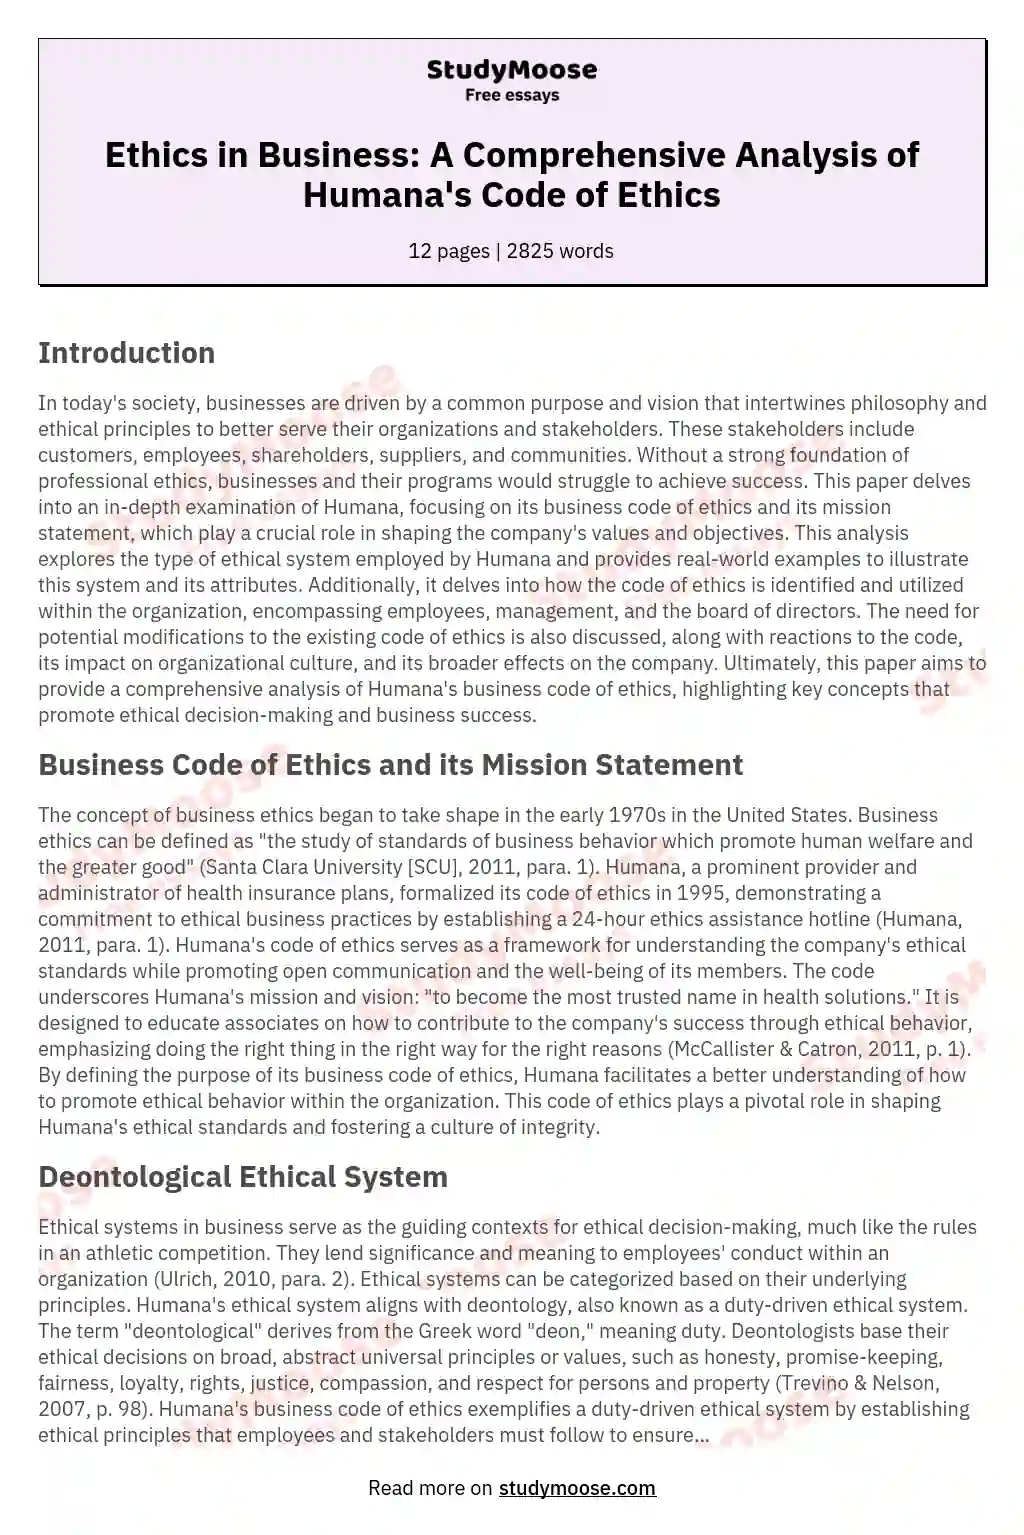 Ethics in Business: A Comprehensive Analysis of Humana's Code of Ethics essay